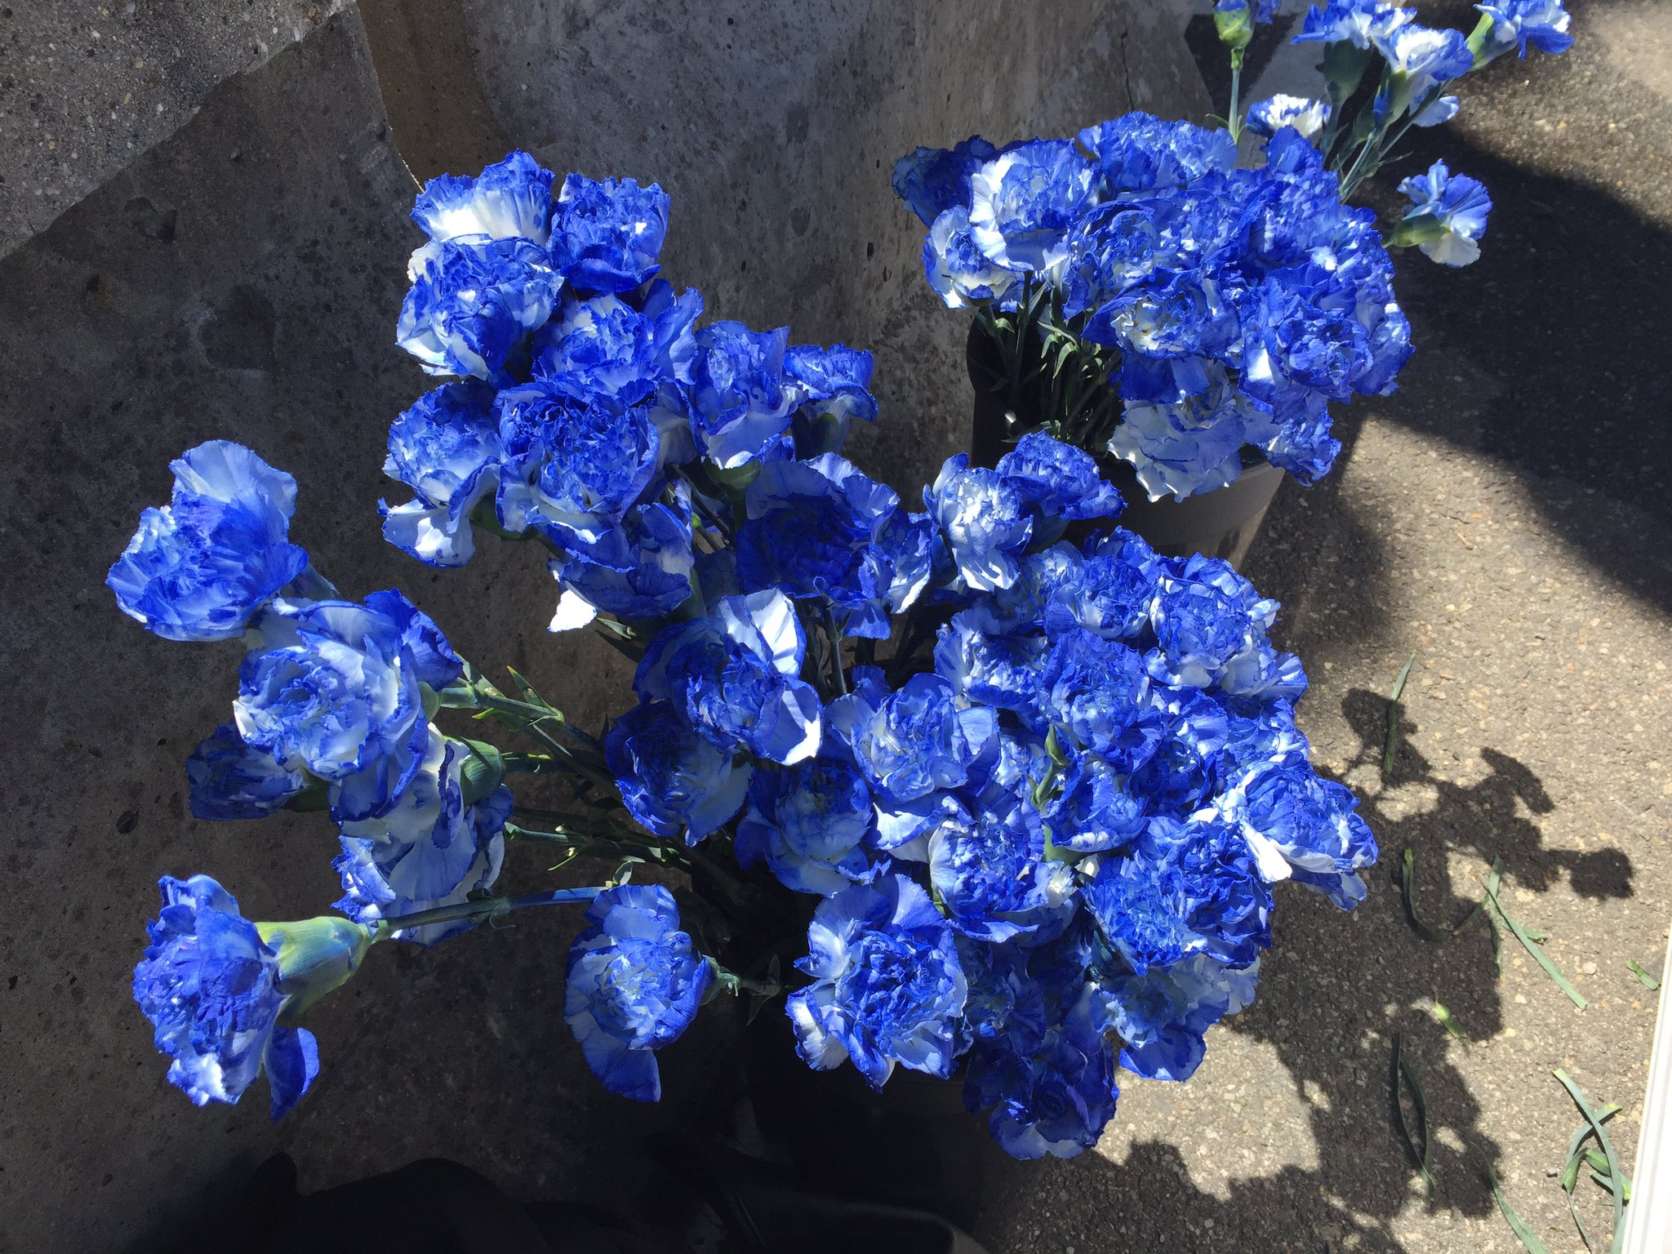 Flowers at the Washington Area Law Enforcement Officers Memorial Service. (WTOP/Kristi King)